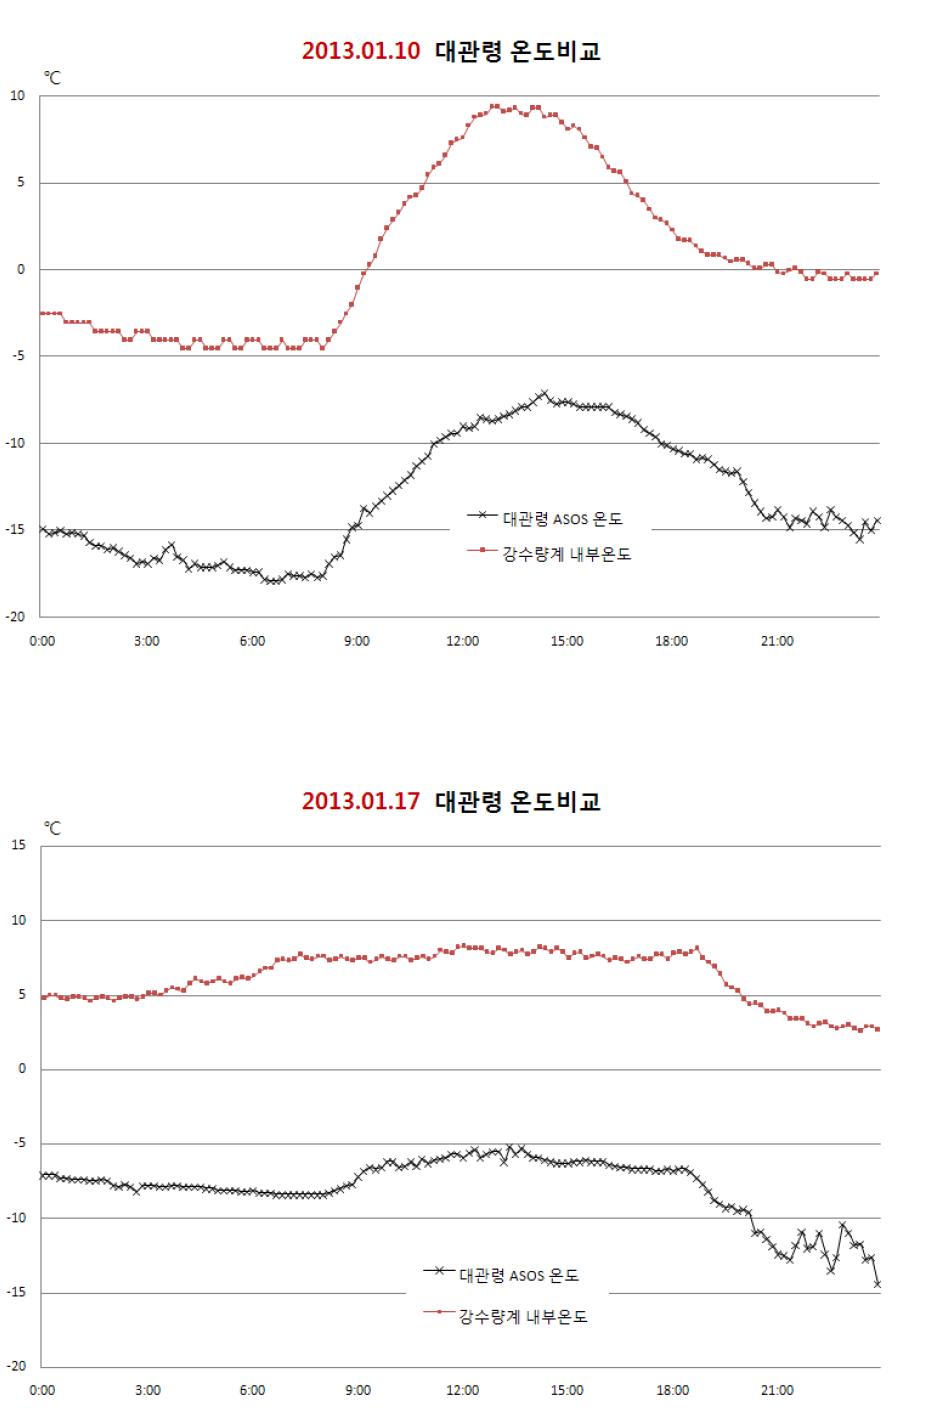 Comparison of outside(ASOS) and internal temperature at Daegwalleong site